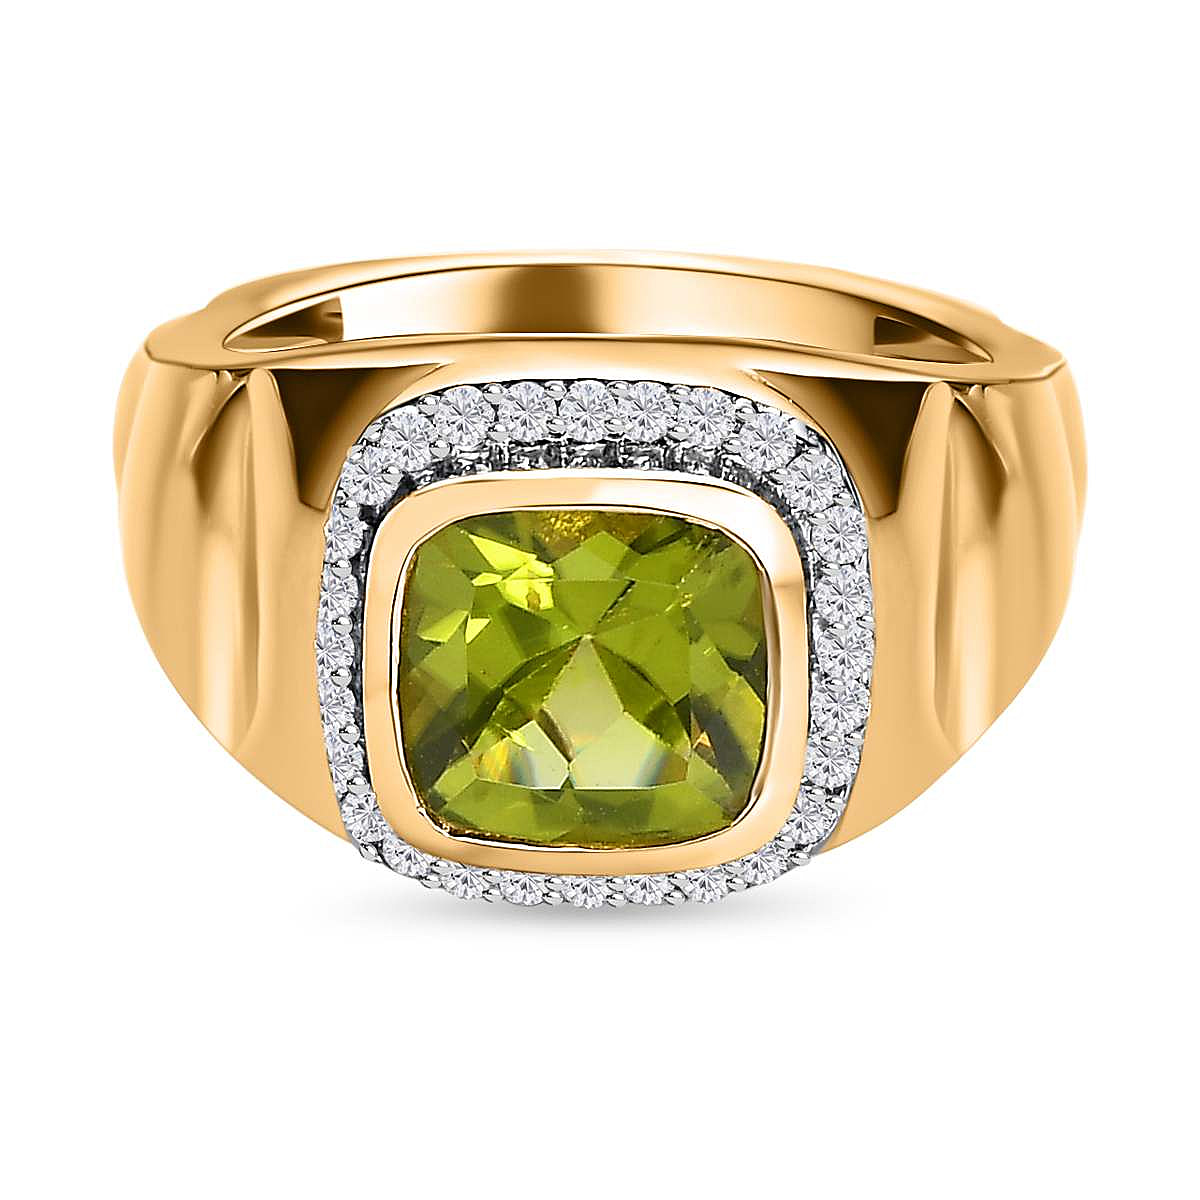 Hebei Peridot and Natural Zircon Ring in Sterling Silver with 18K Vermeil Yellow Gold